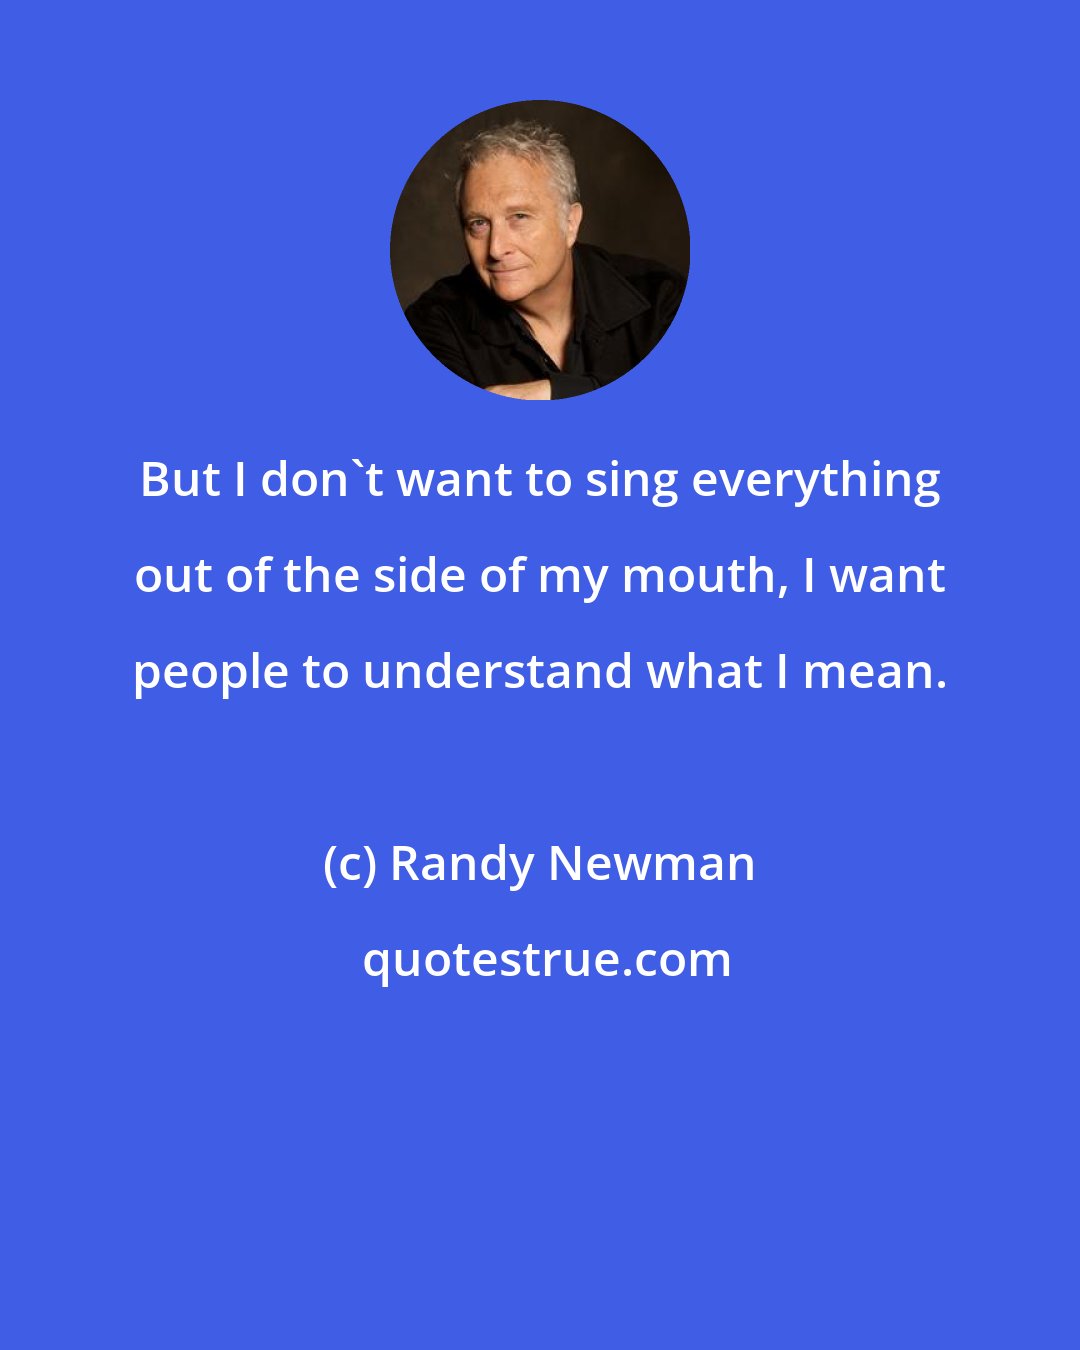 Randy Newman: But I don't want to sing everything out of the side of my mouth, I want people to understand what I mean.